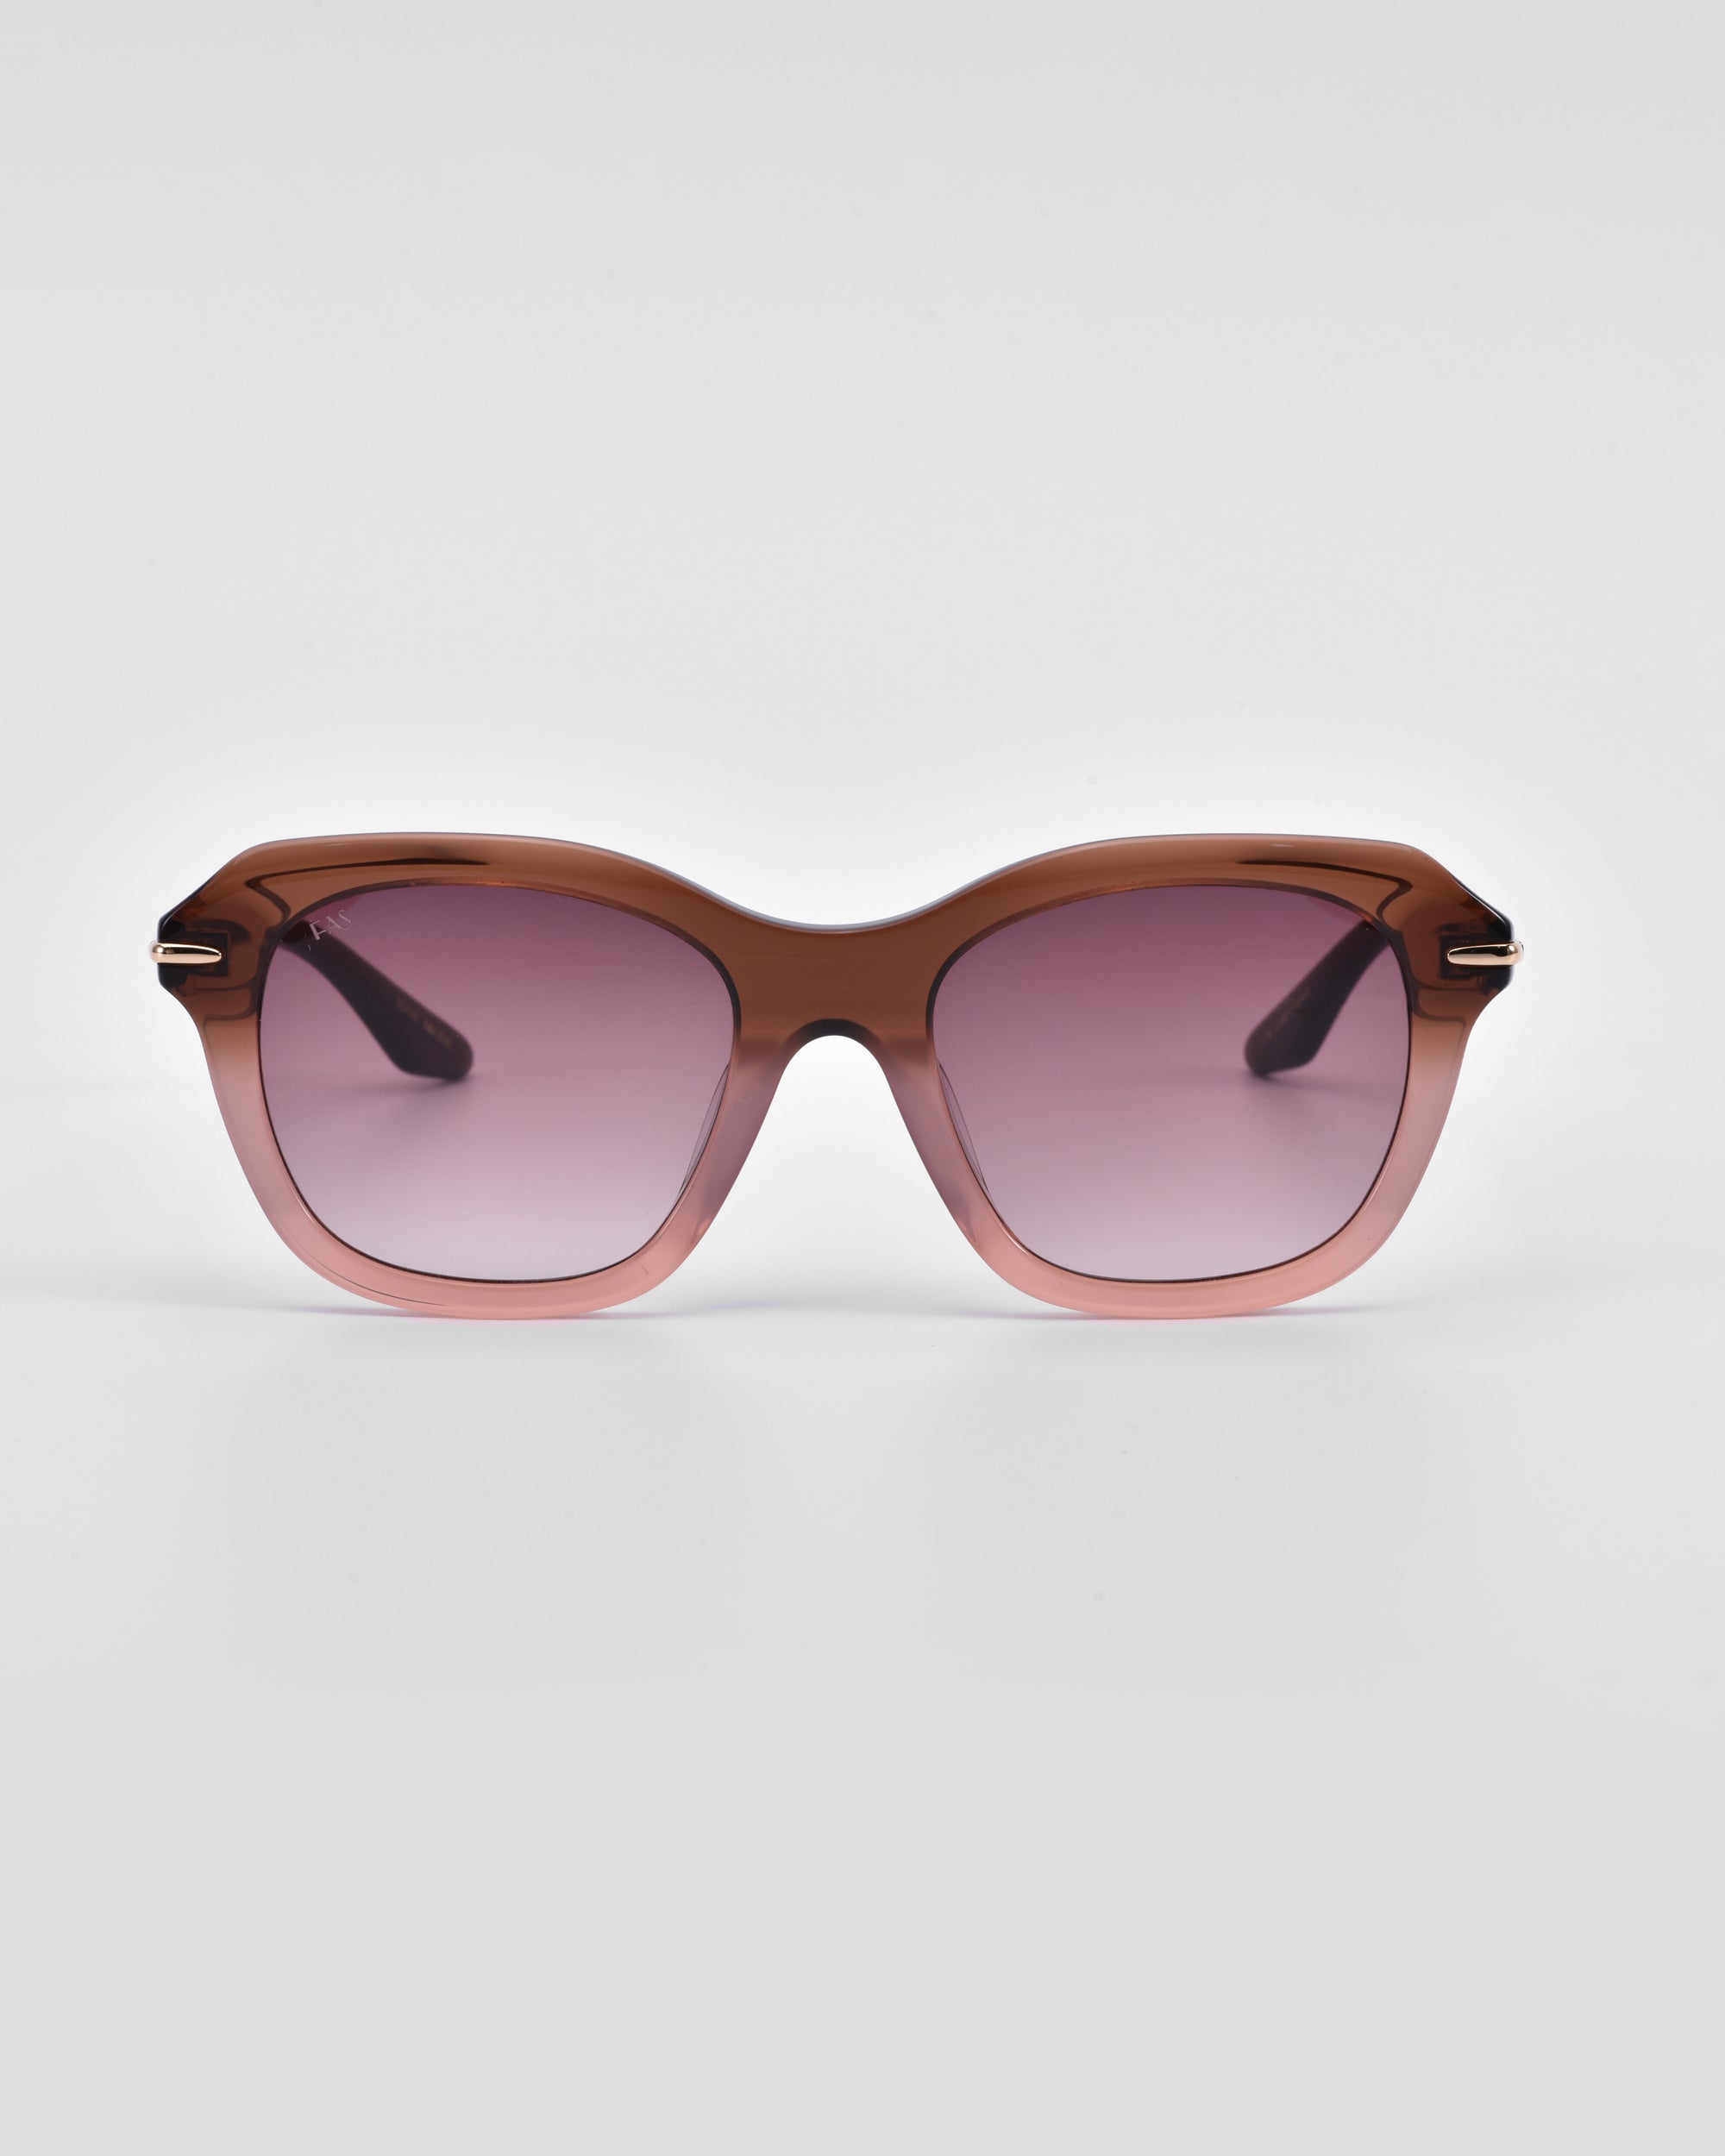 A pair of stylish, oversized cat-eye sunglasses with a gradient brown-pink frame and pink-tinted lenses. The arms of the glasses are black and slightly curved, featuring metallic accents near the hinges. The Helene by For Art&#39;s Sake® stands out against a plain white background.